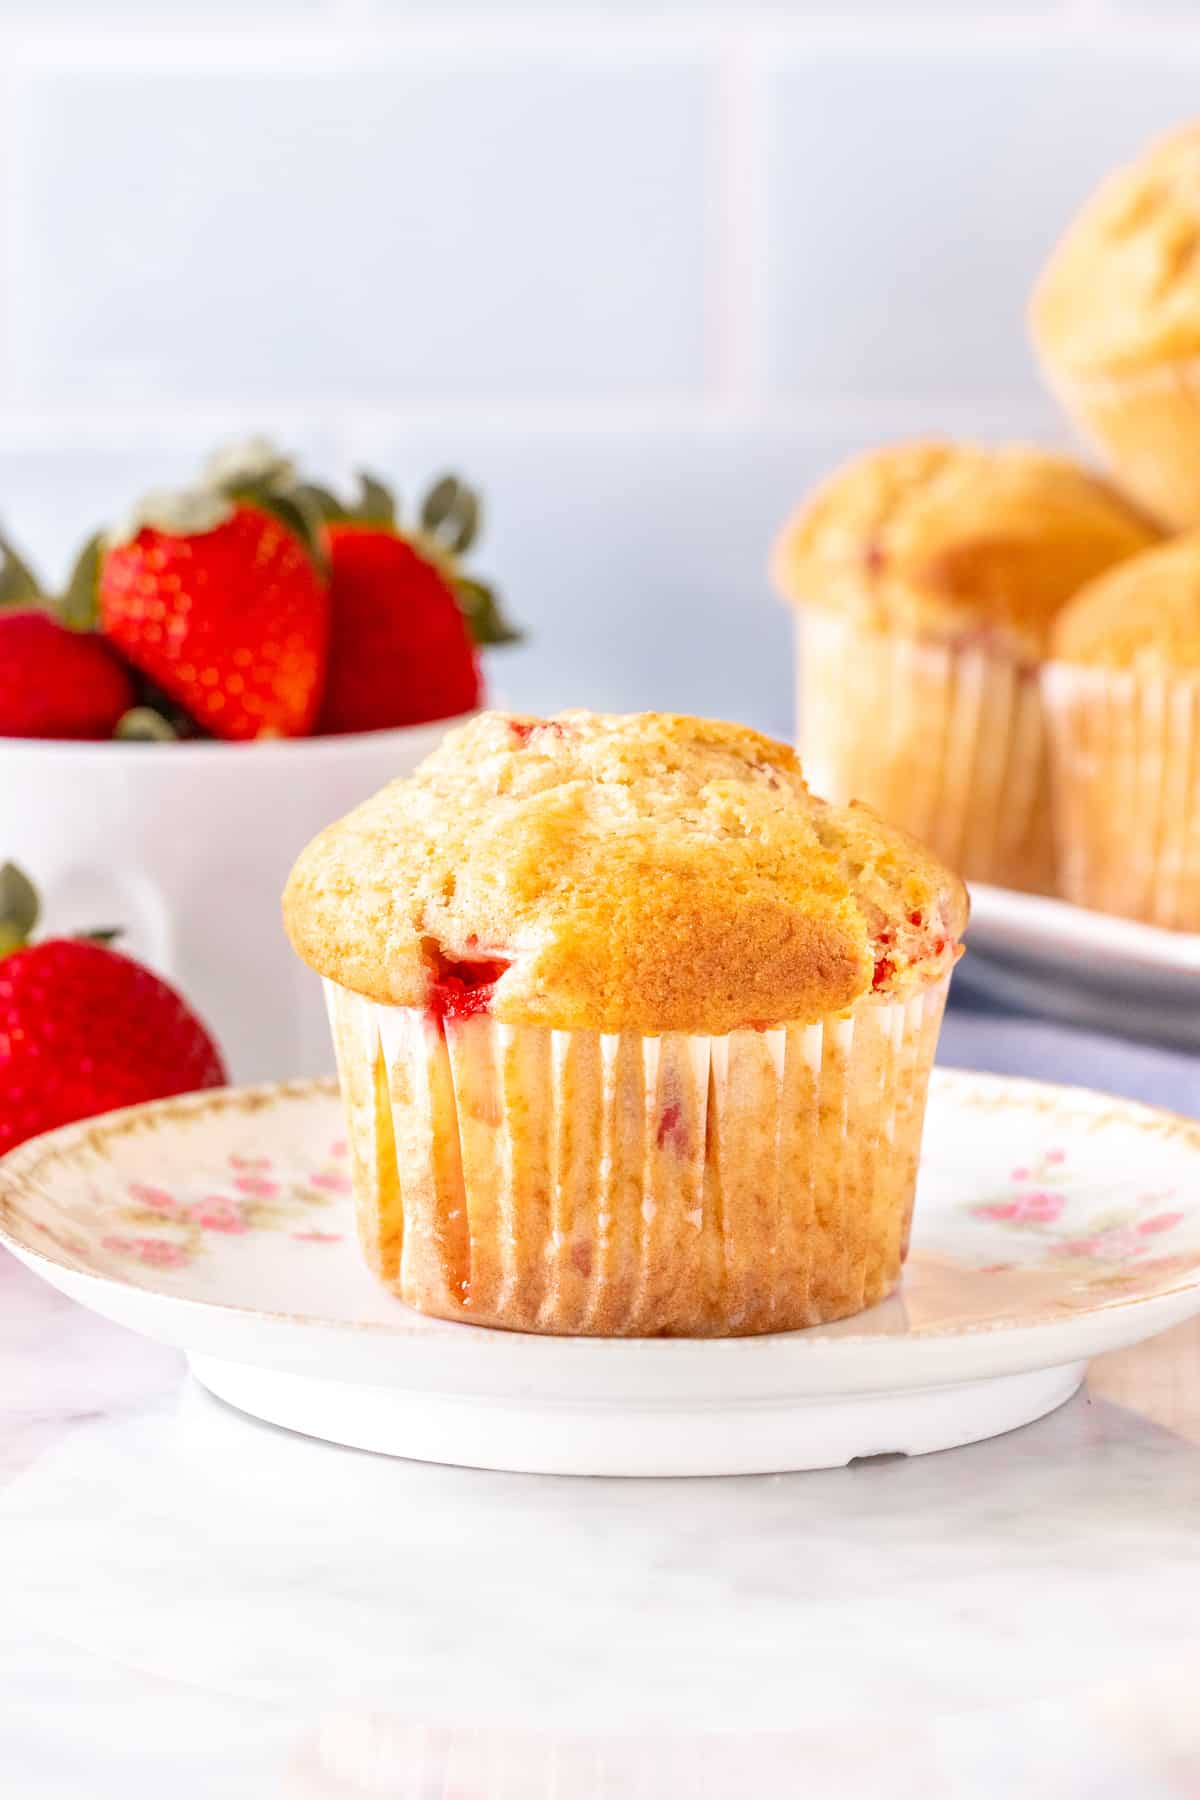 Strawberry muffin on plate